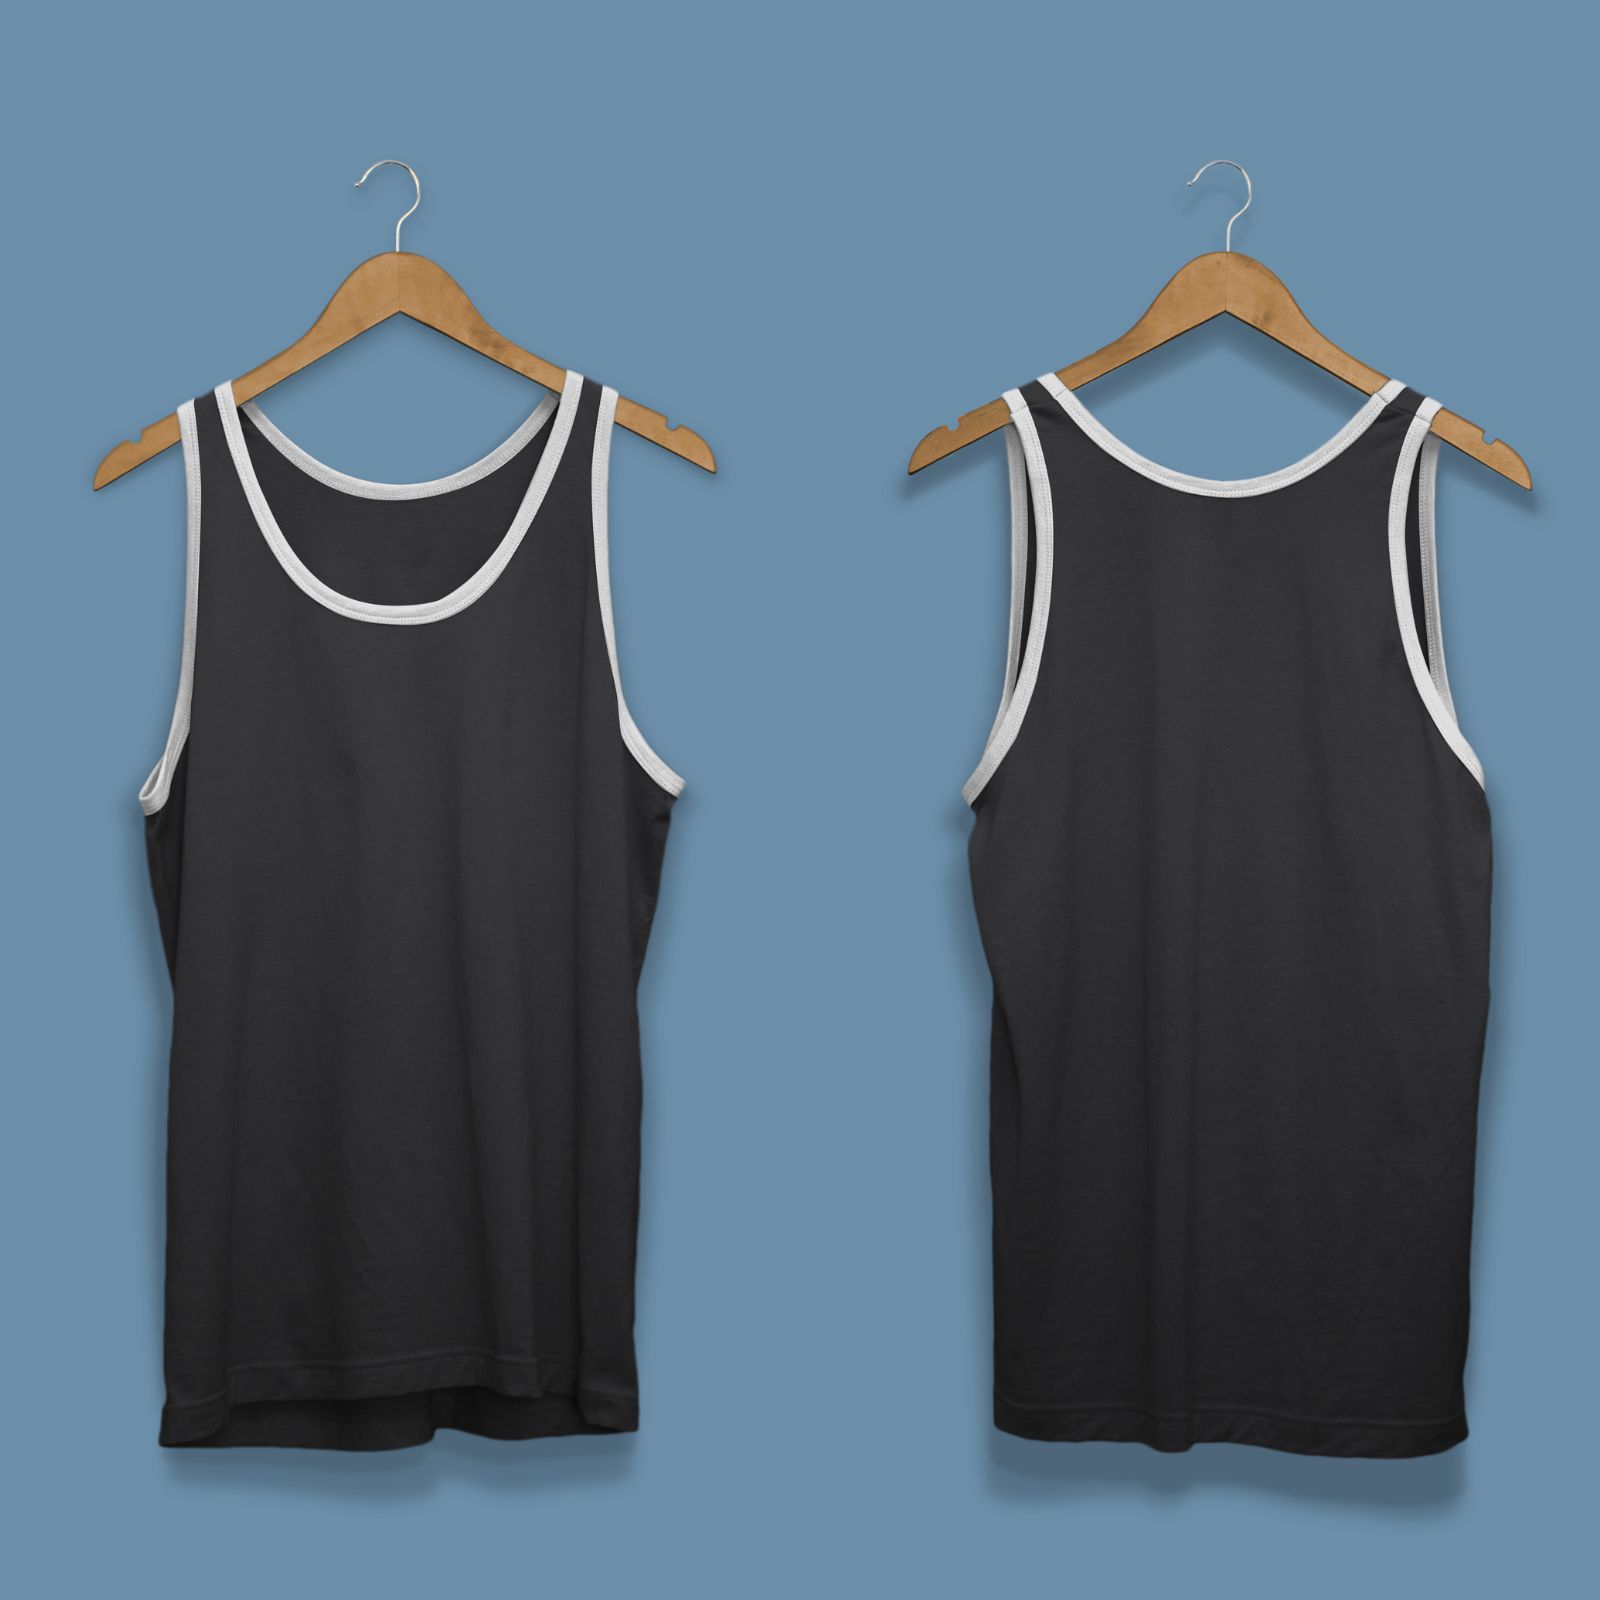 Premium Quality Pair Of Custom Black Tank Tops With White Border on Neck and Sleeves.